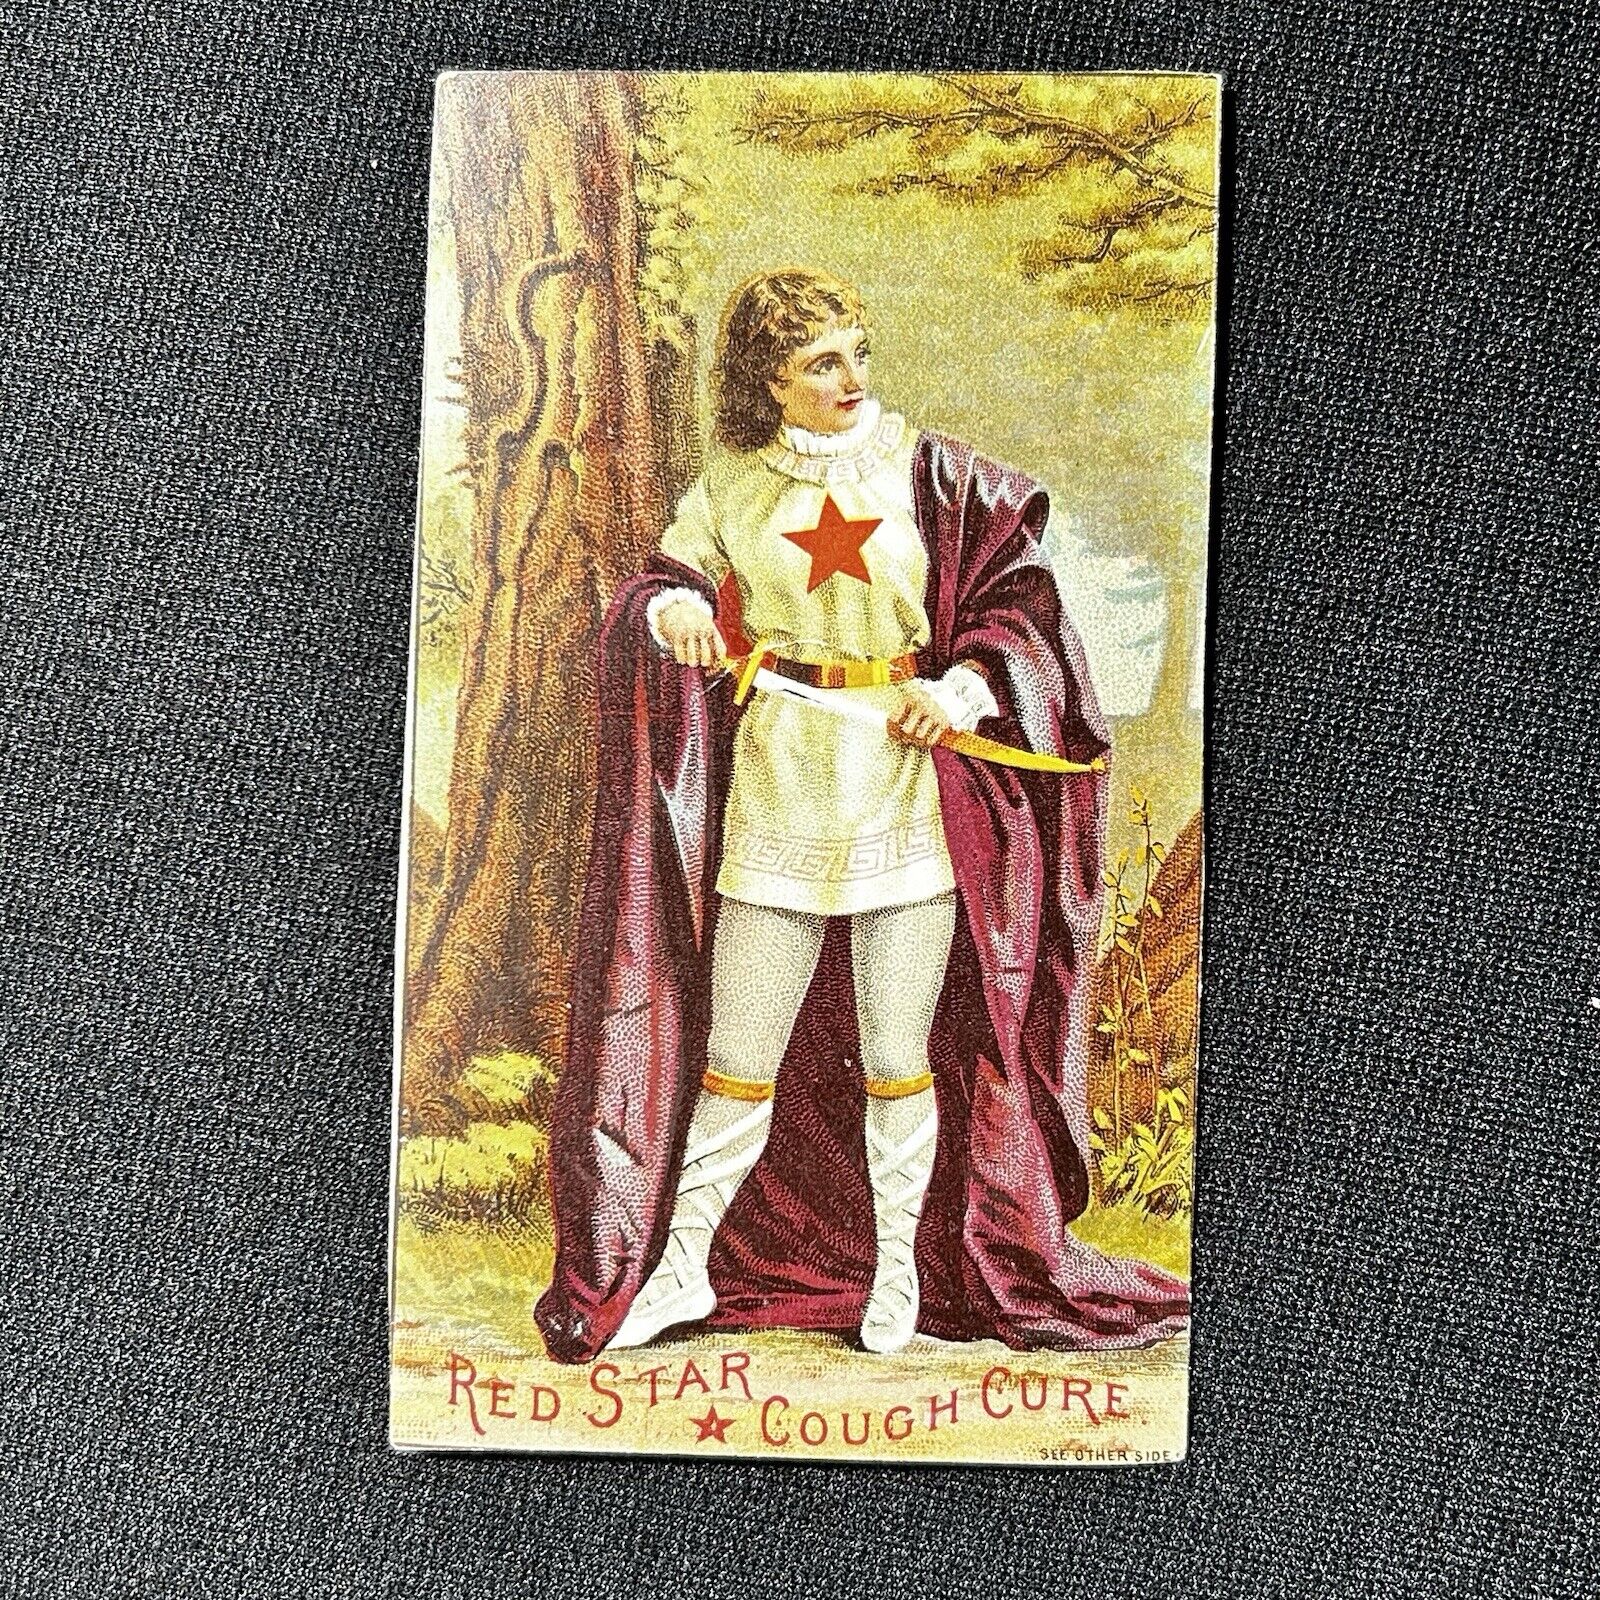 1880s Red Star Cough Cure Trade Card Charles Vogeler, T A Baxter Grand Rapids